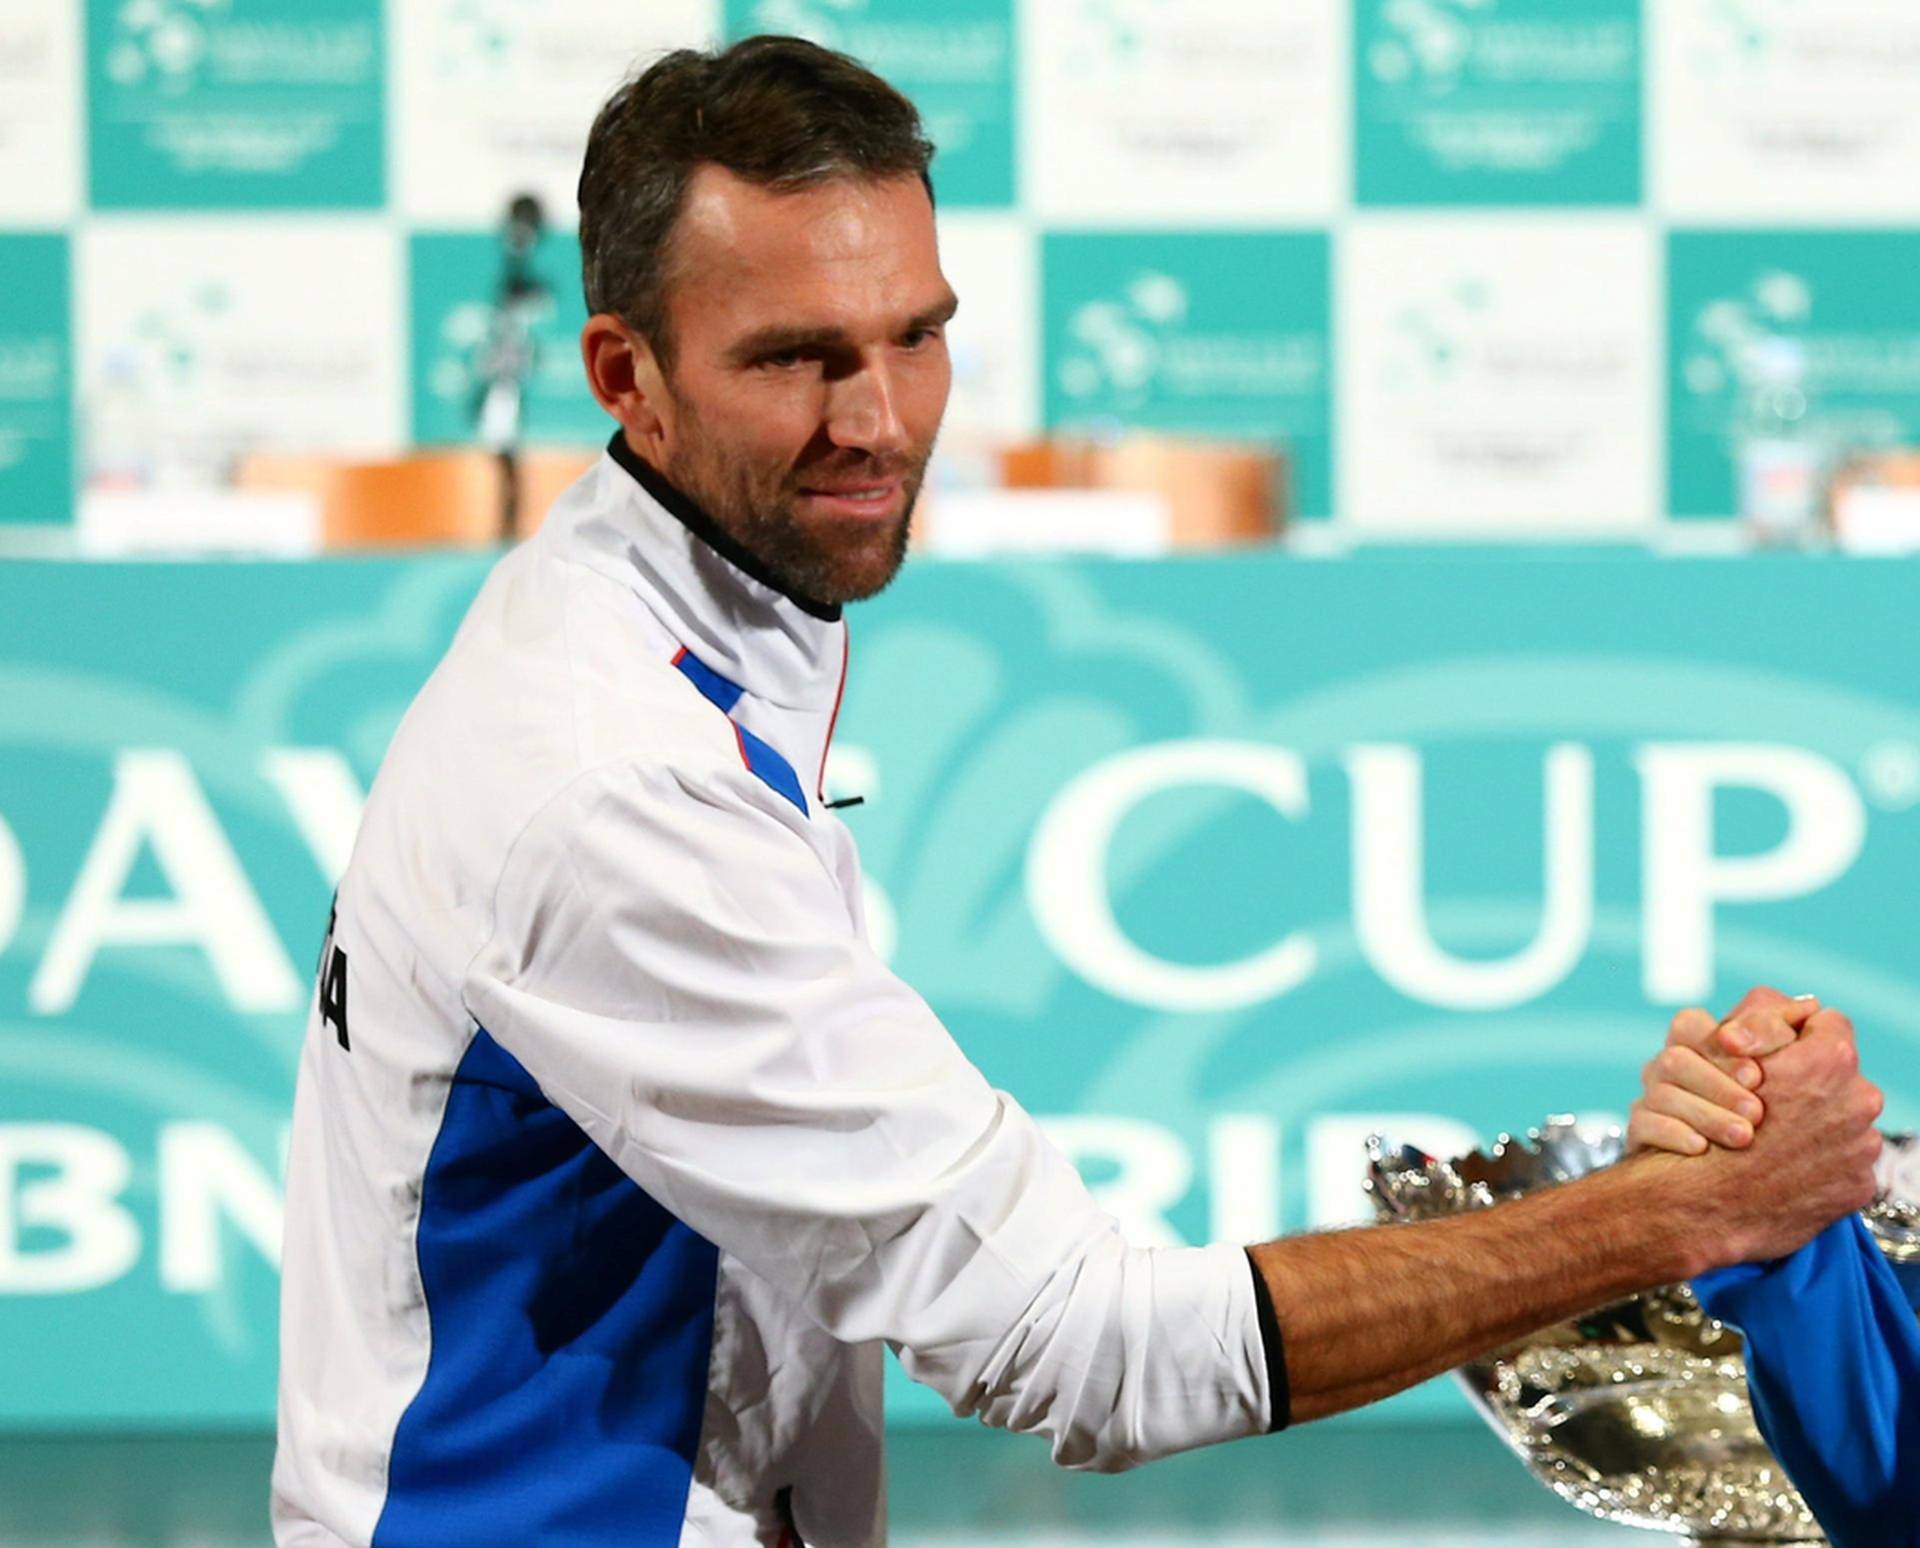 Croatia's tennis team player Ivo Karlovic and Argentina's tennis team player Federico Delbonis pose for a picture after the official draw for their Davis Cup finals in Zagreb